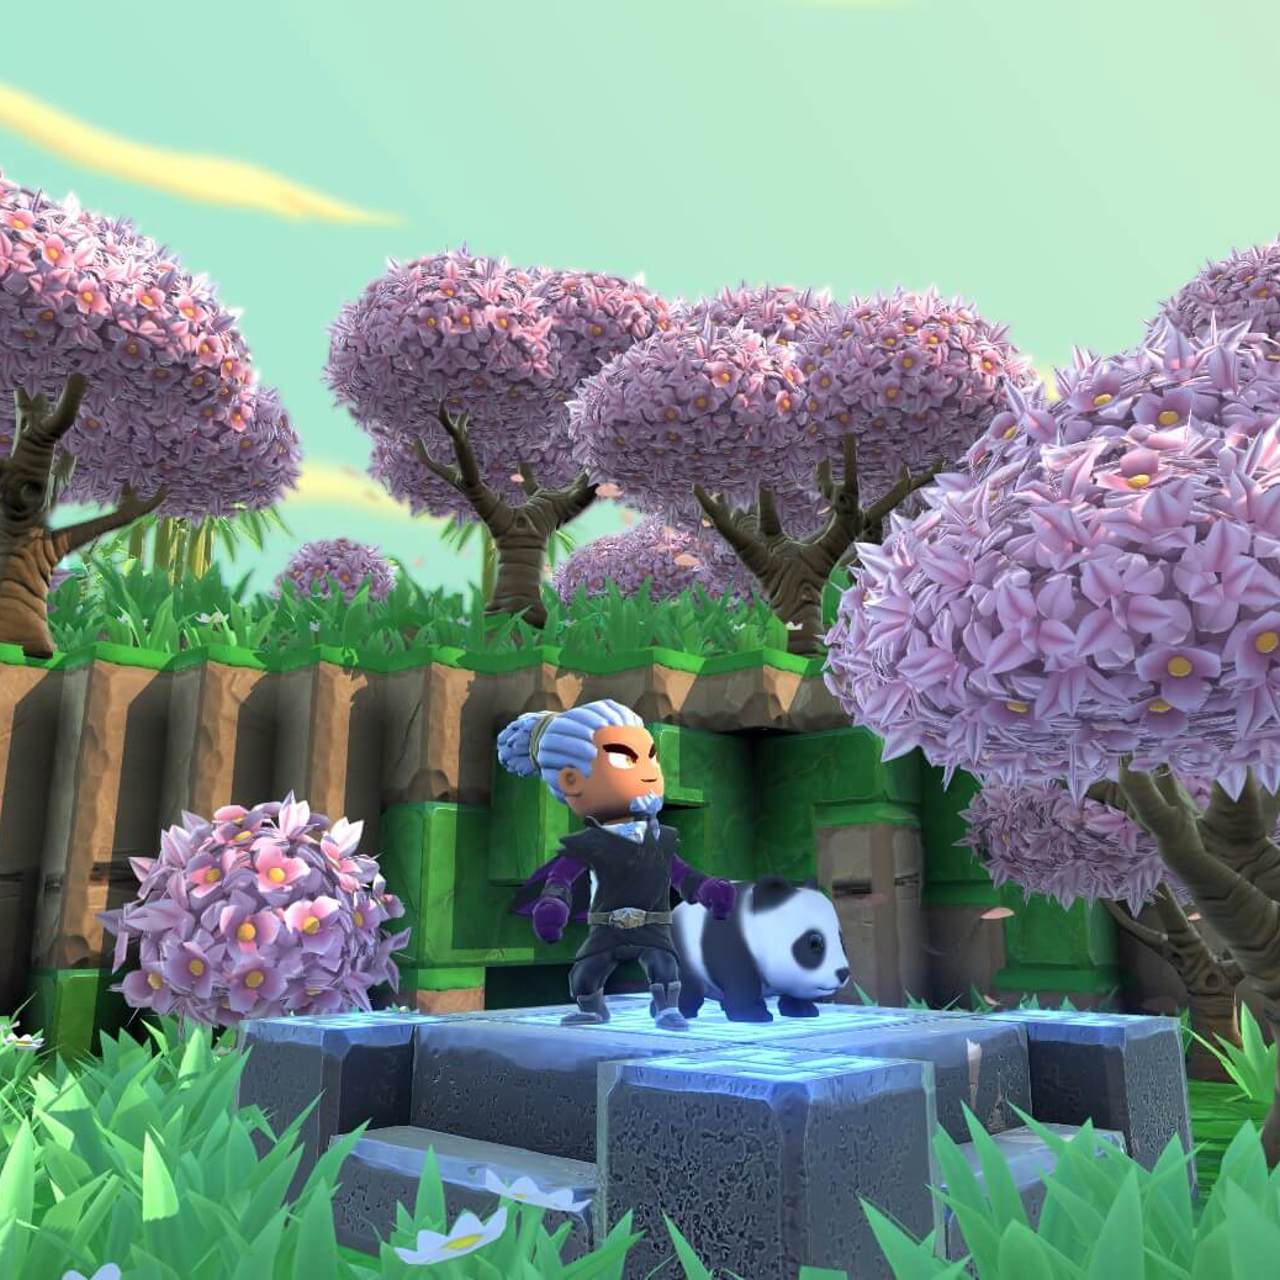 Portal Knights Screenshot of character with pet panda in a field with trees